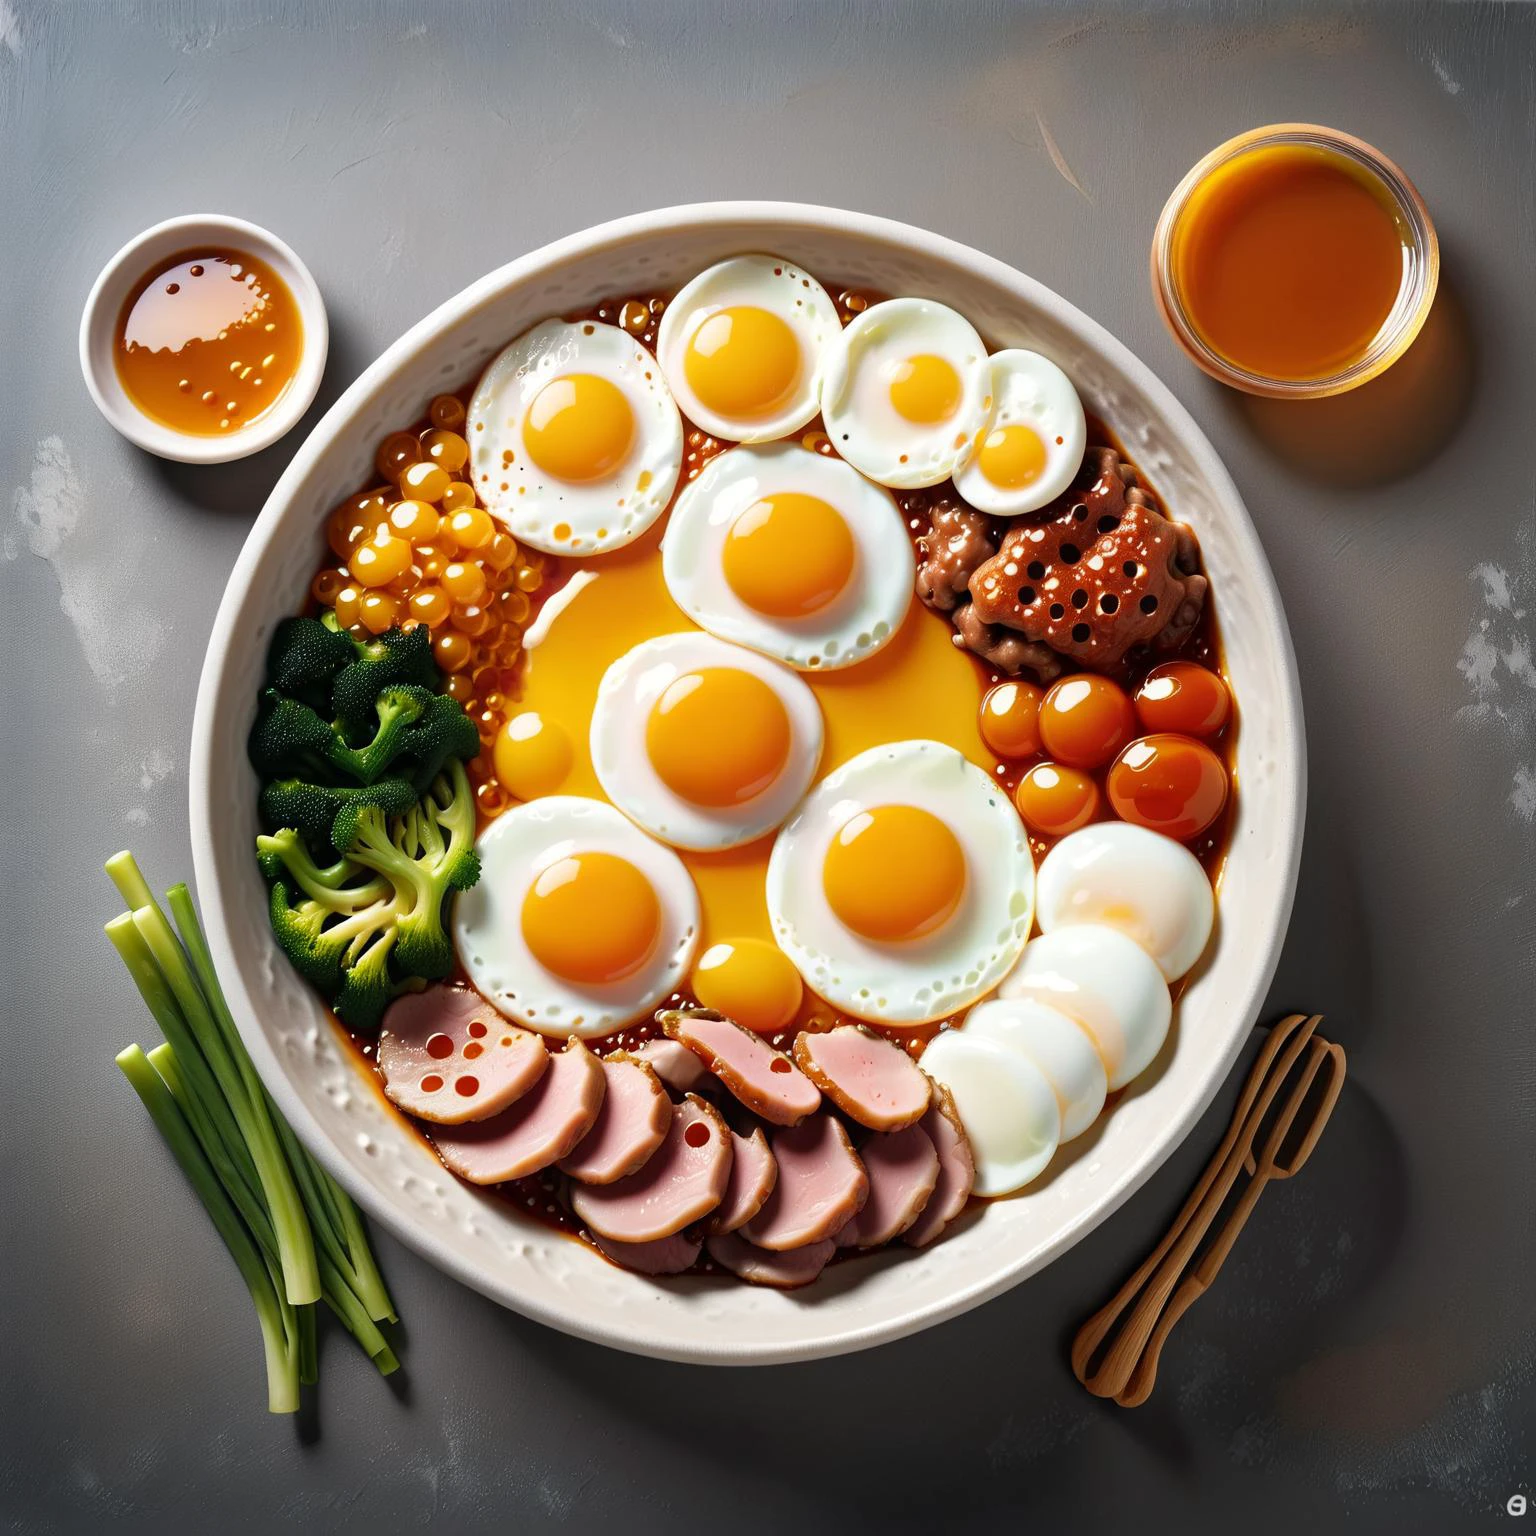 a bowl of food with meat,vegetables,and an egg on top of it with sauces on the side,Choi Buk,sakimichan,a stock photo,dau-al-set,honey,trypophobia,dvr-honey,made of dvr-honey,ral-friedegg,